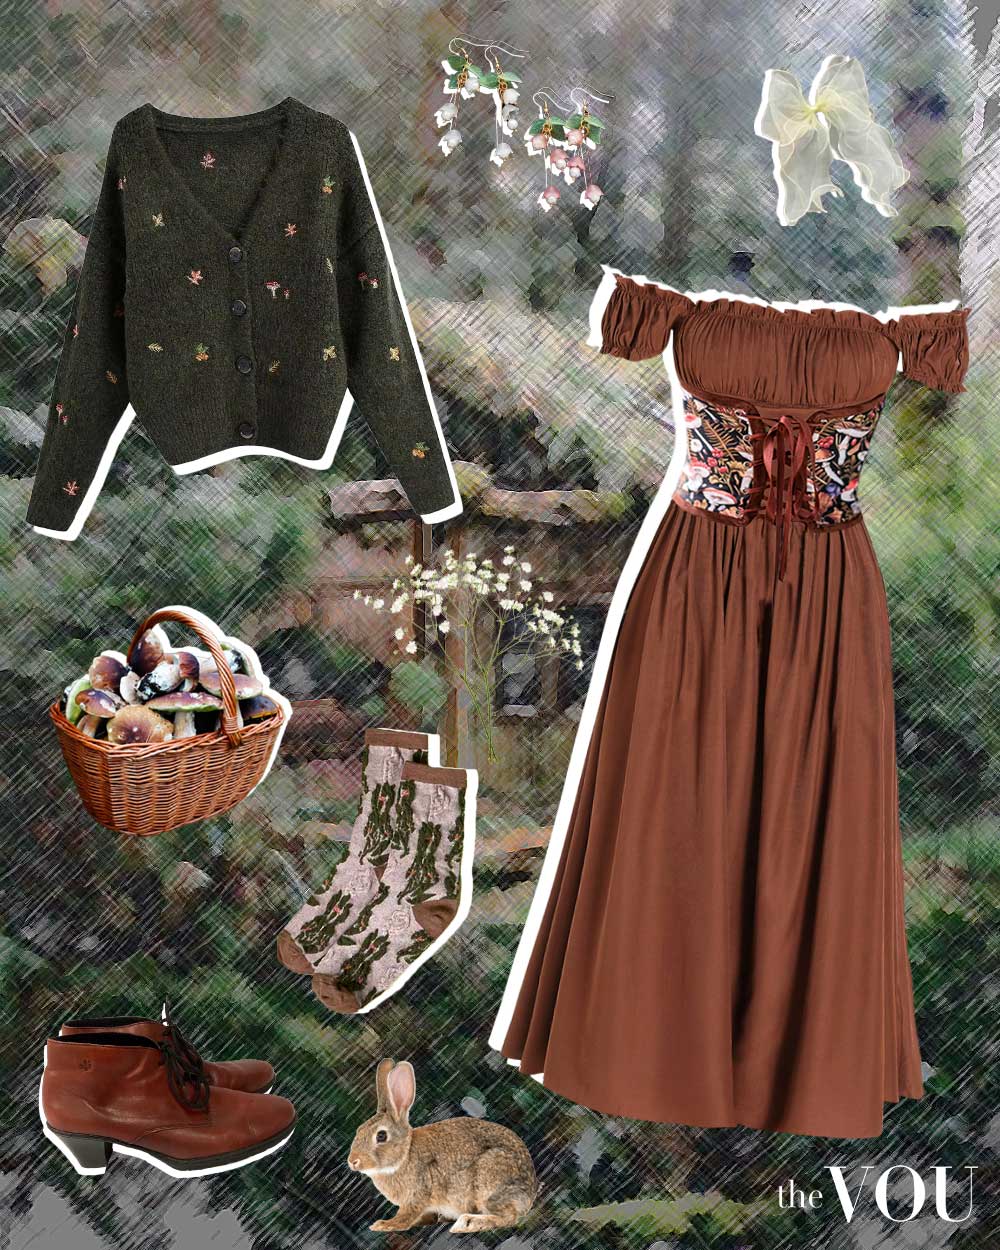 7 Playful Goblincore Outfit Ideas for a Nature-inspired Look - Fashnfly